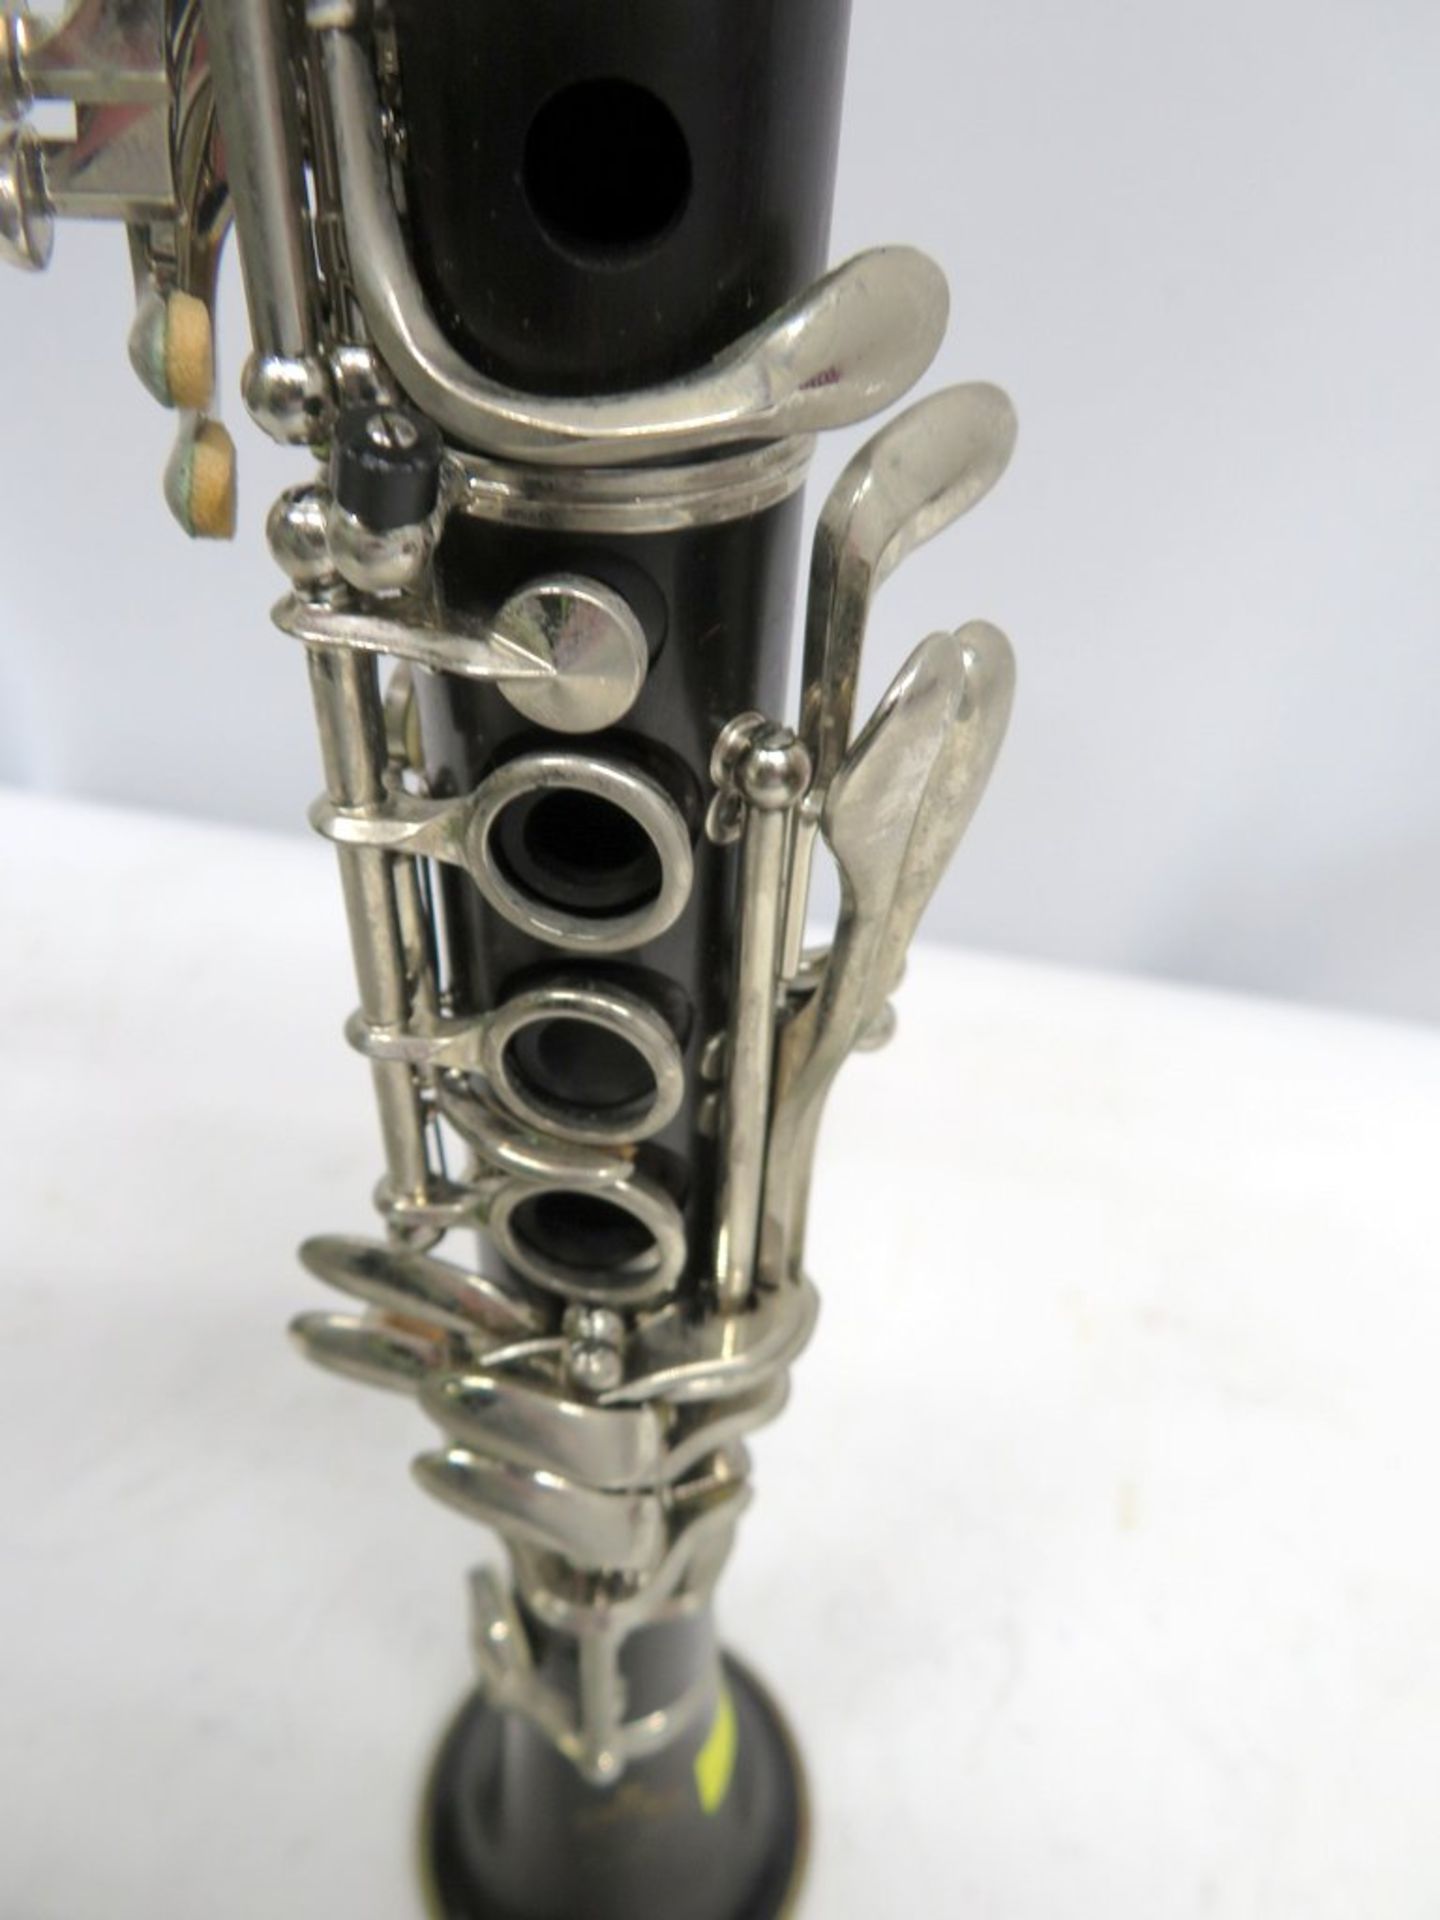 Buffet Crampon E Flat Clarinet Complete With Case. - Image 7 of 14